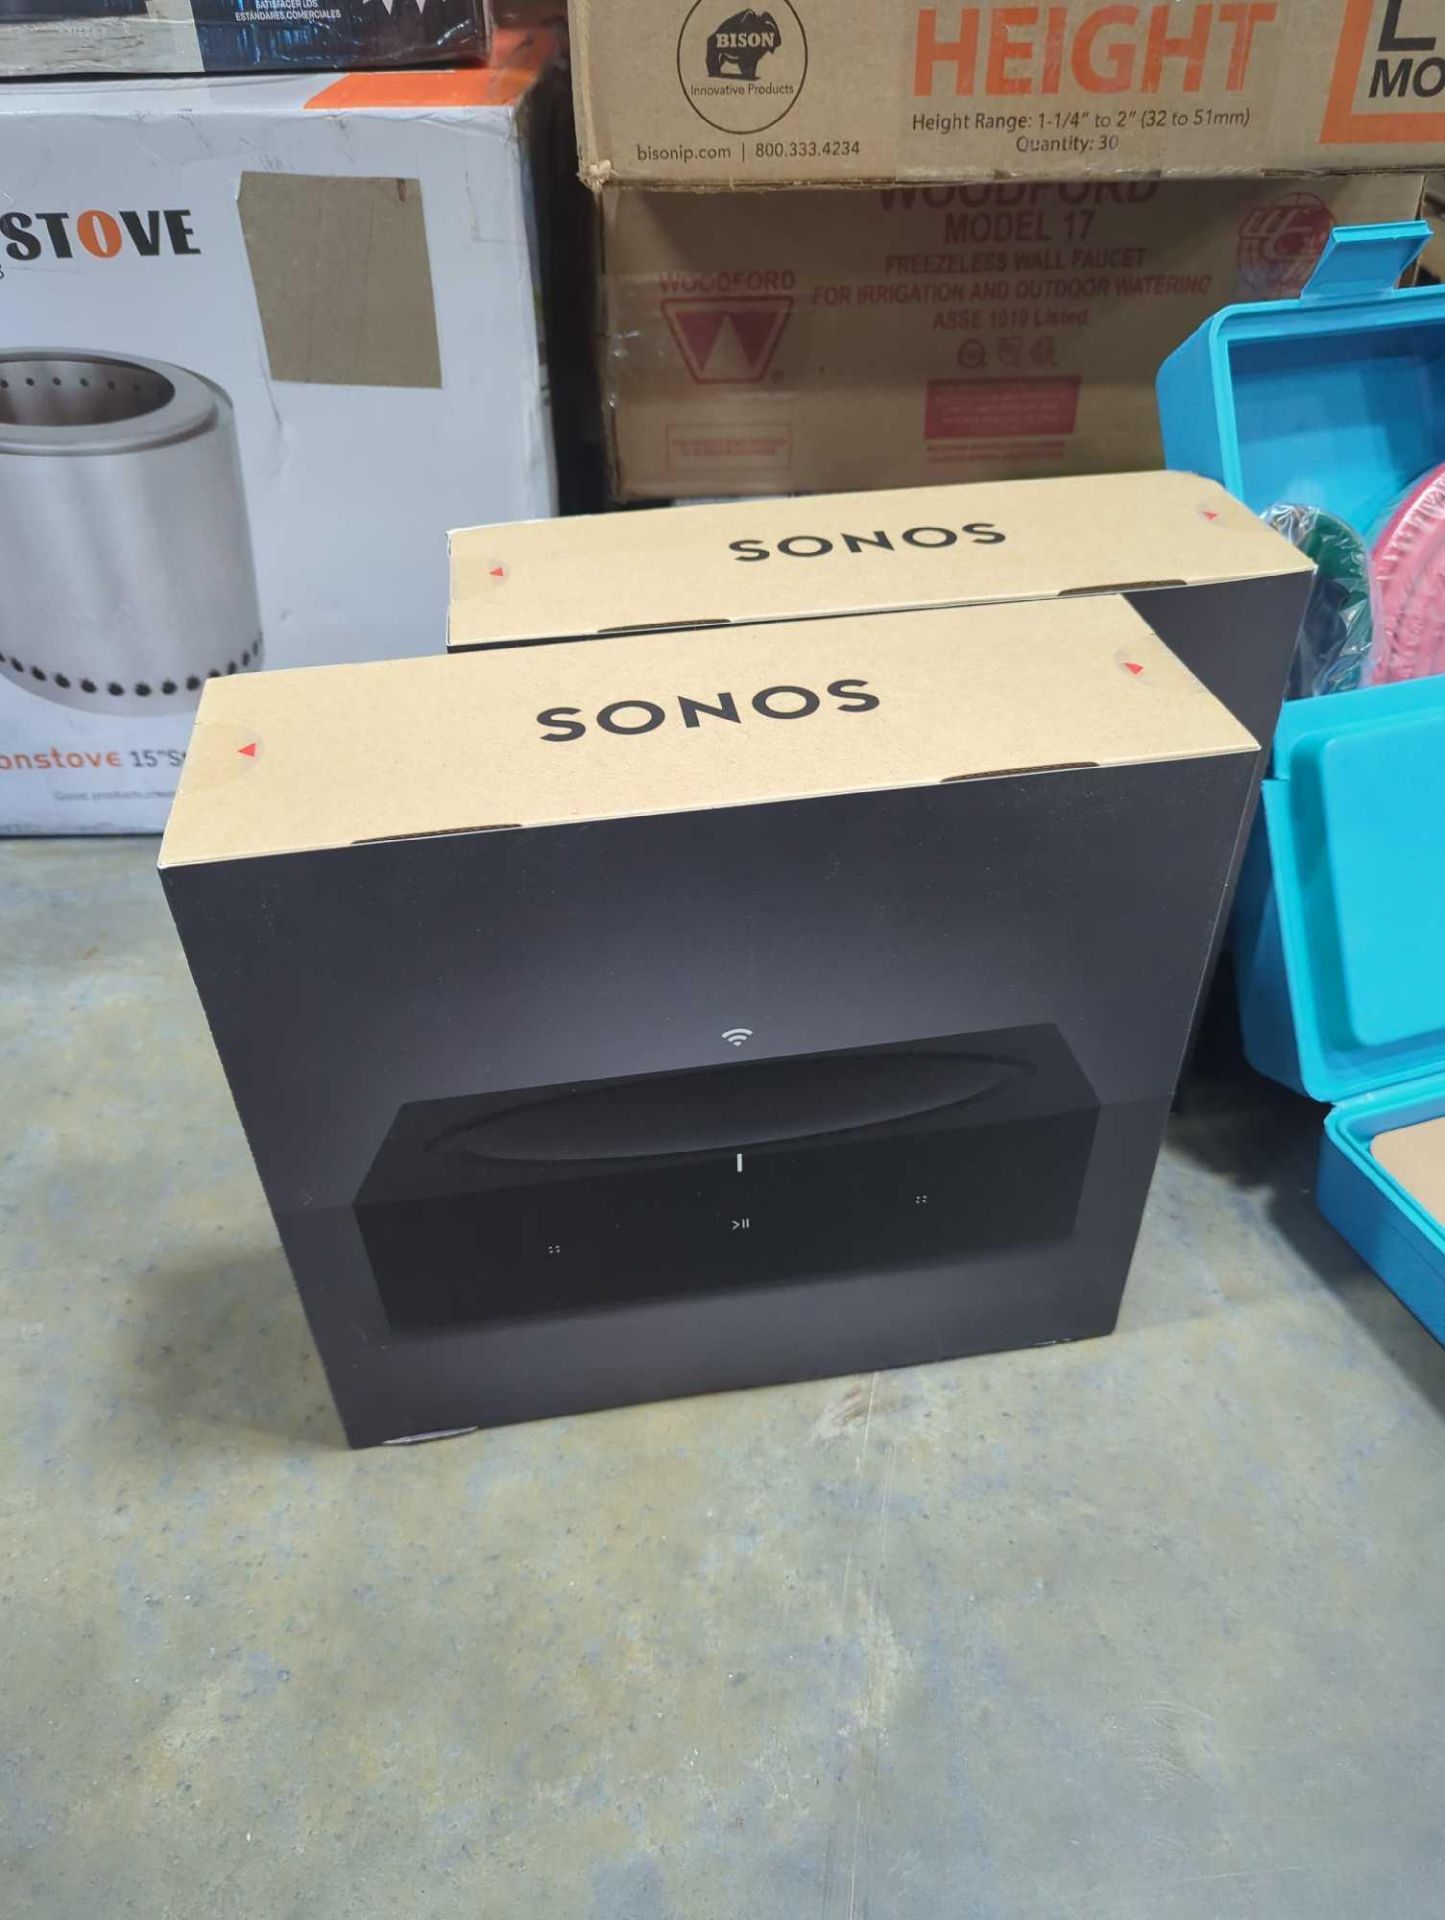 Sonos Amps, Masterbuilt fryer, and more - Image 13 of 33